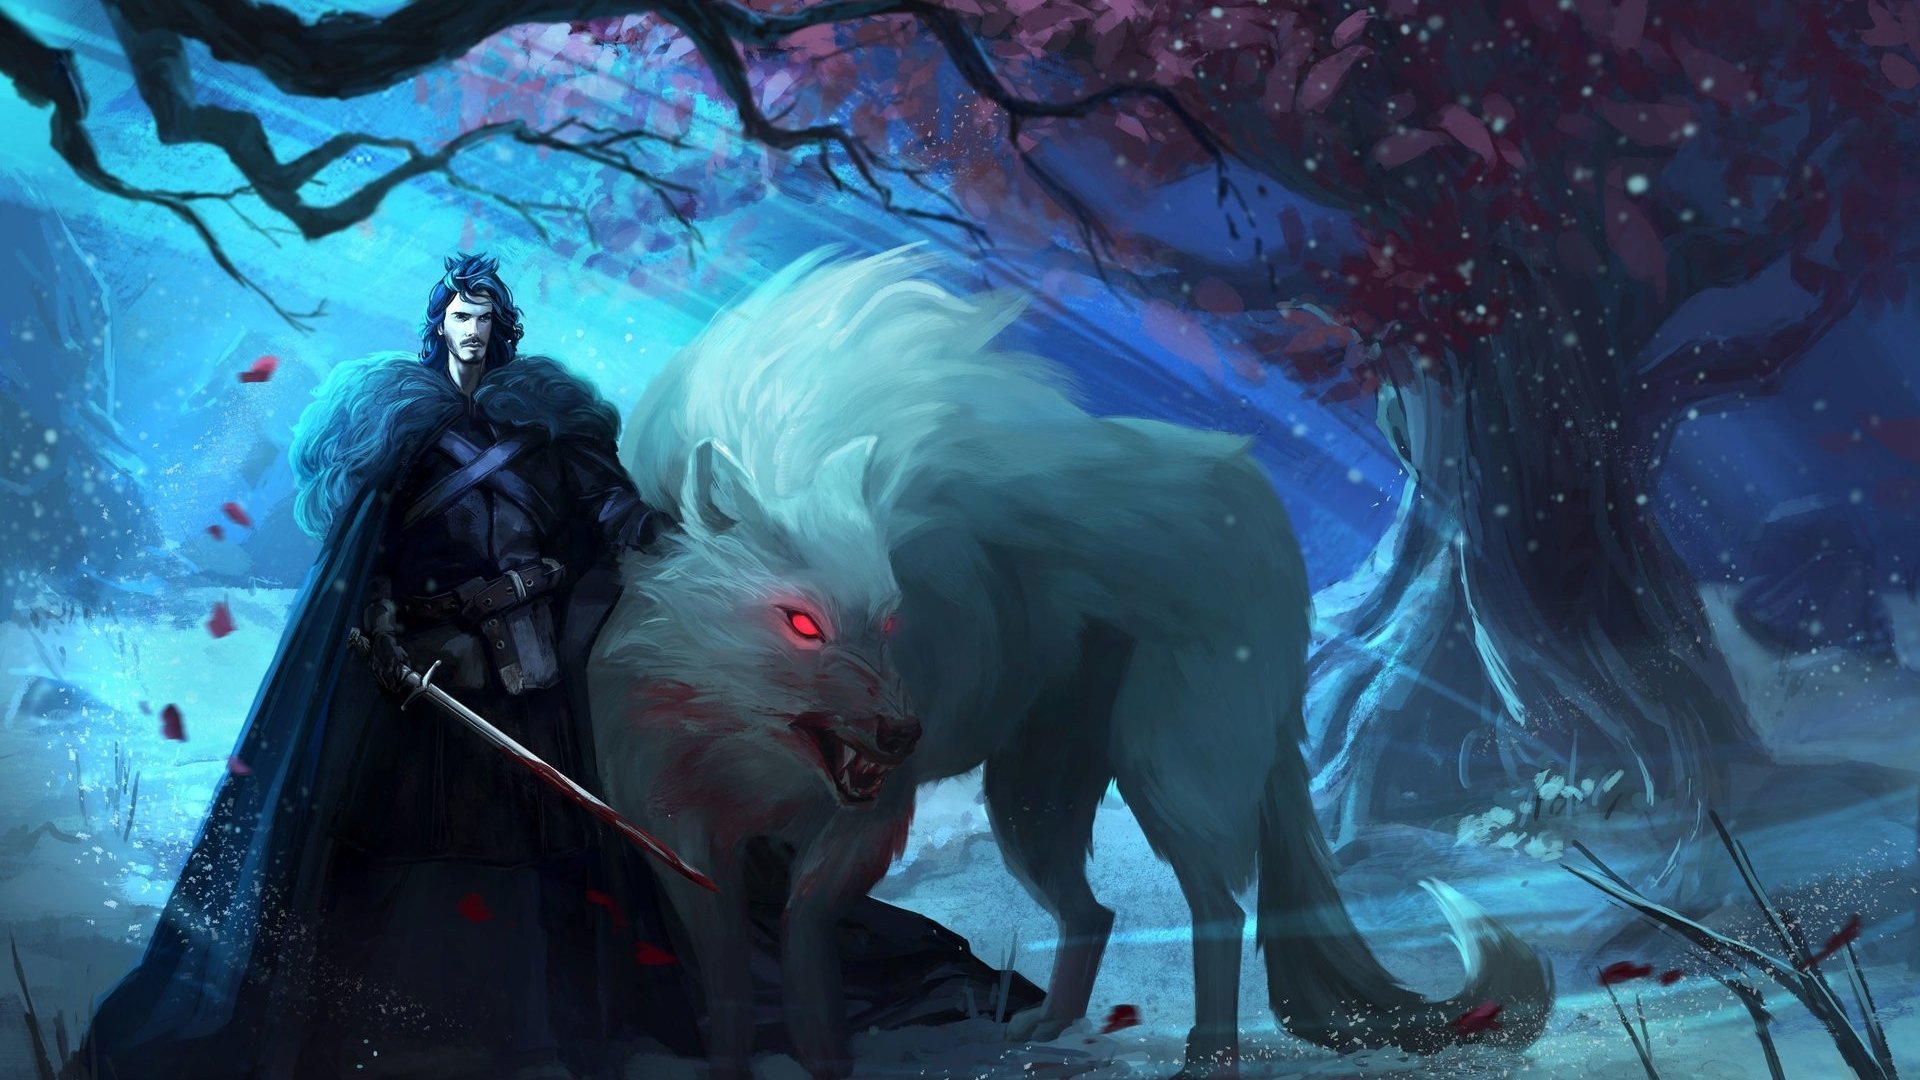 Jon Snow And Ghost Wallpapers 1080p On Hd Wallpaper - Song Of Ice And Fire - HD Wallpaper 